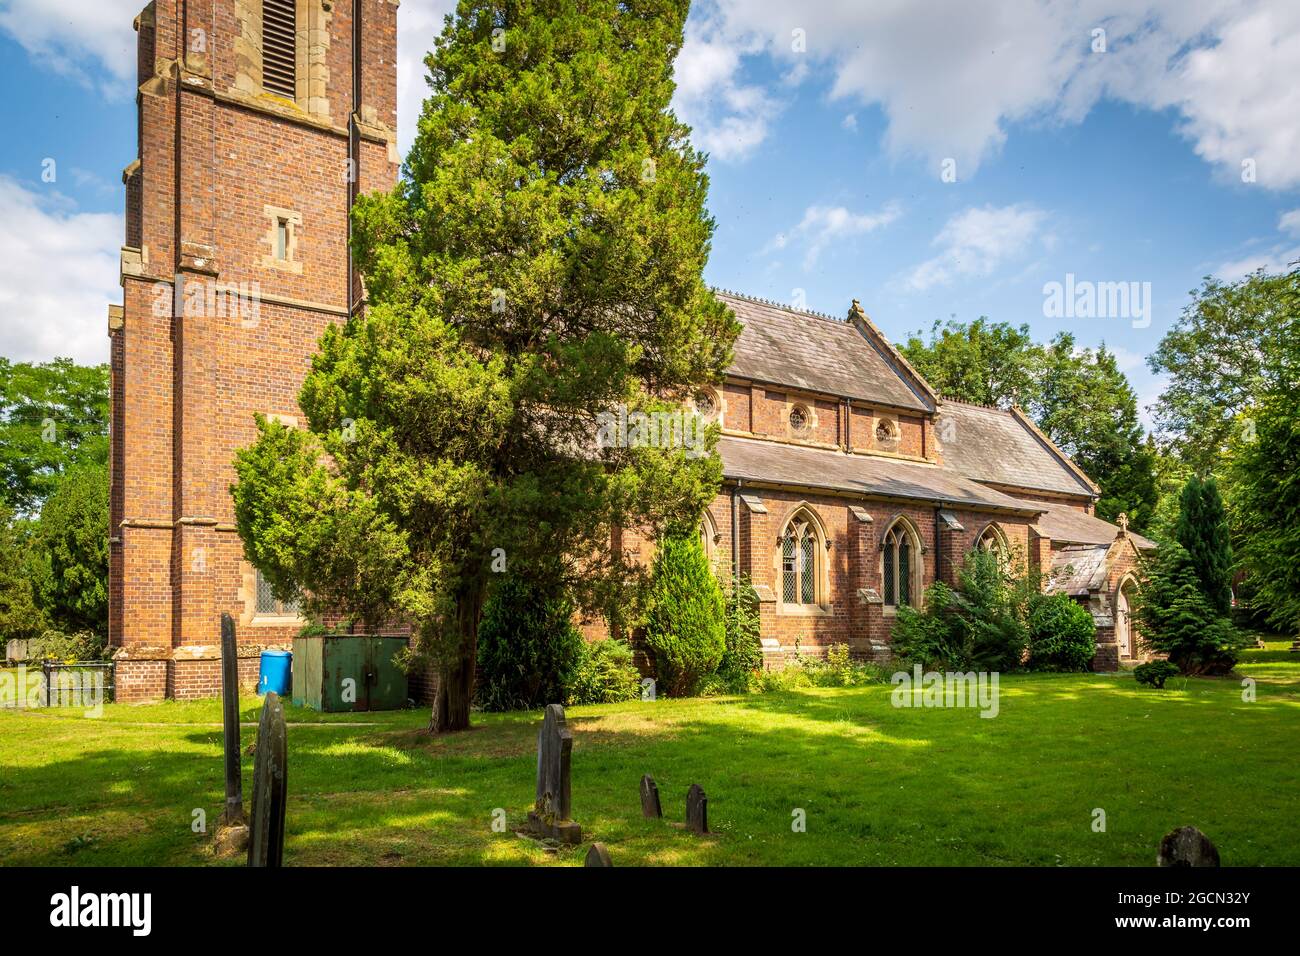 St. Peters Church im Worcestershire Dorf Cookley. Stockfoto